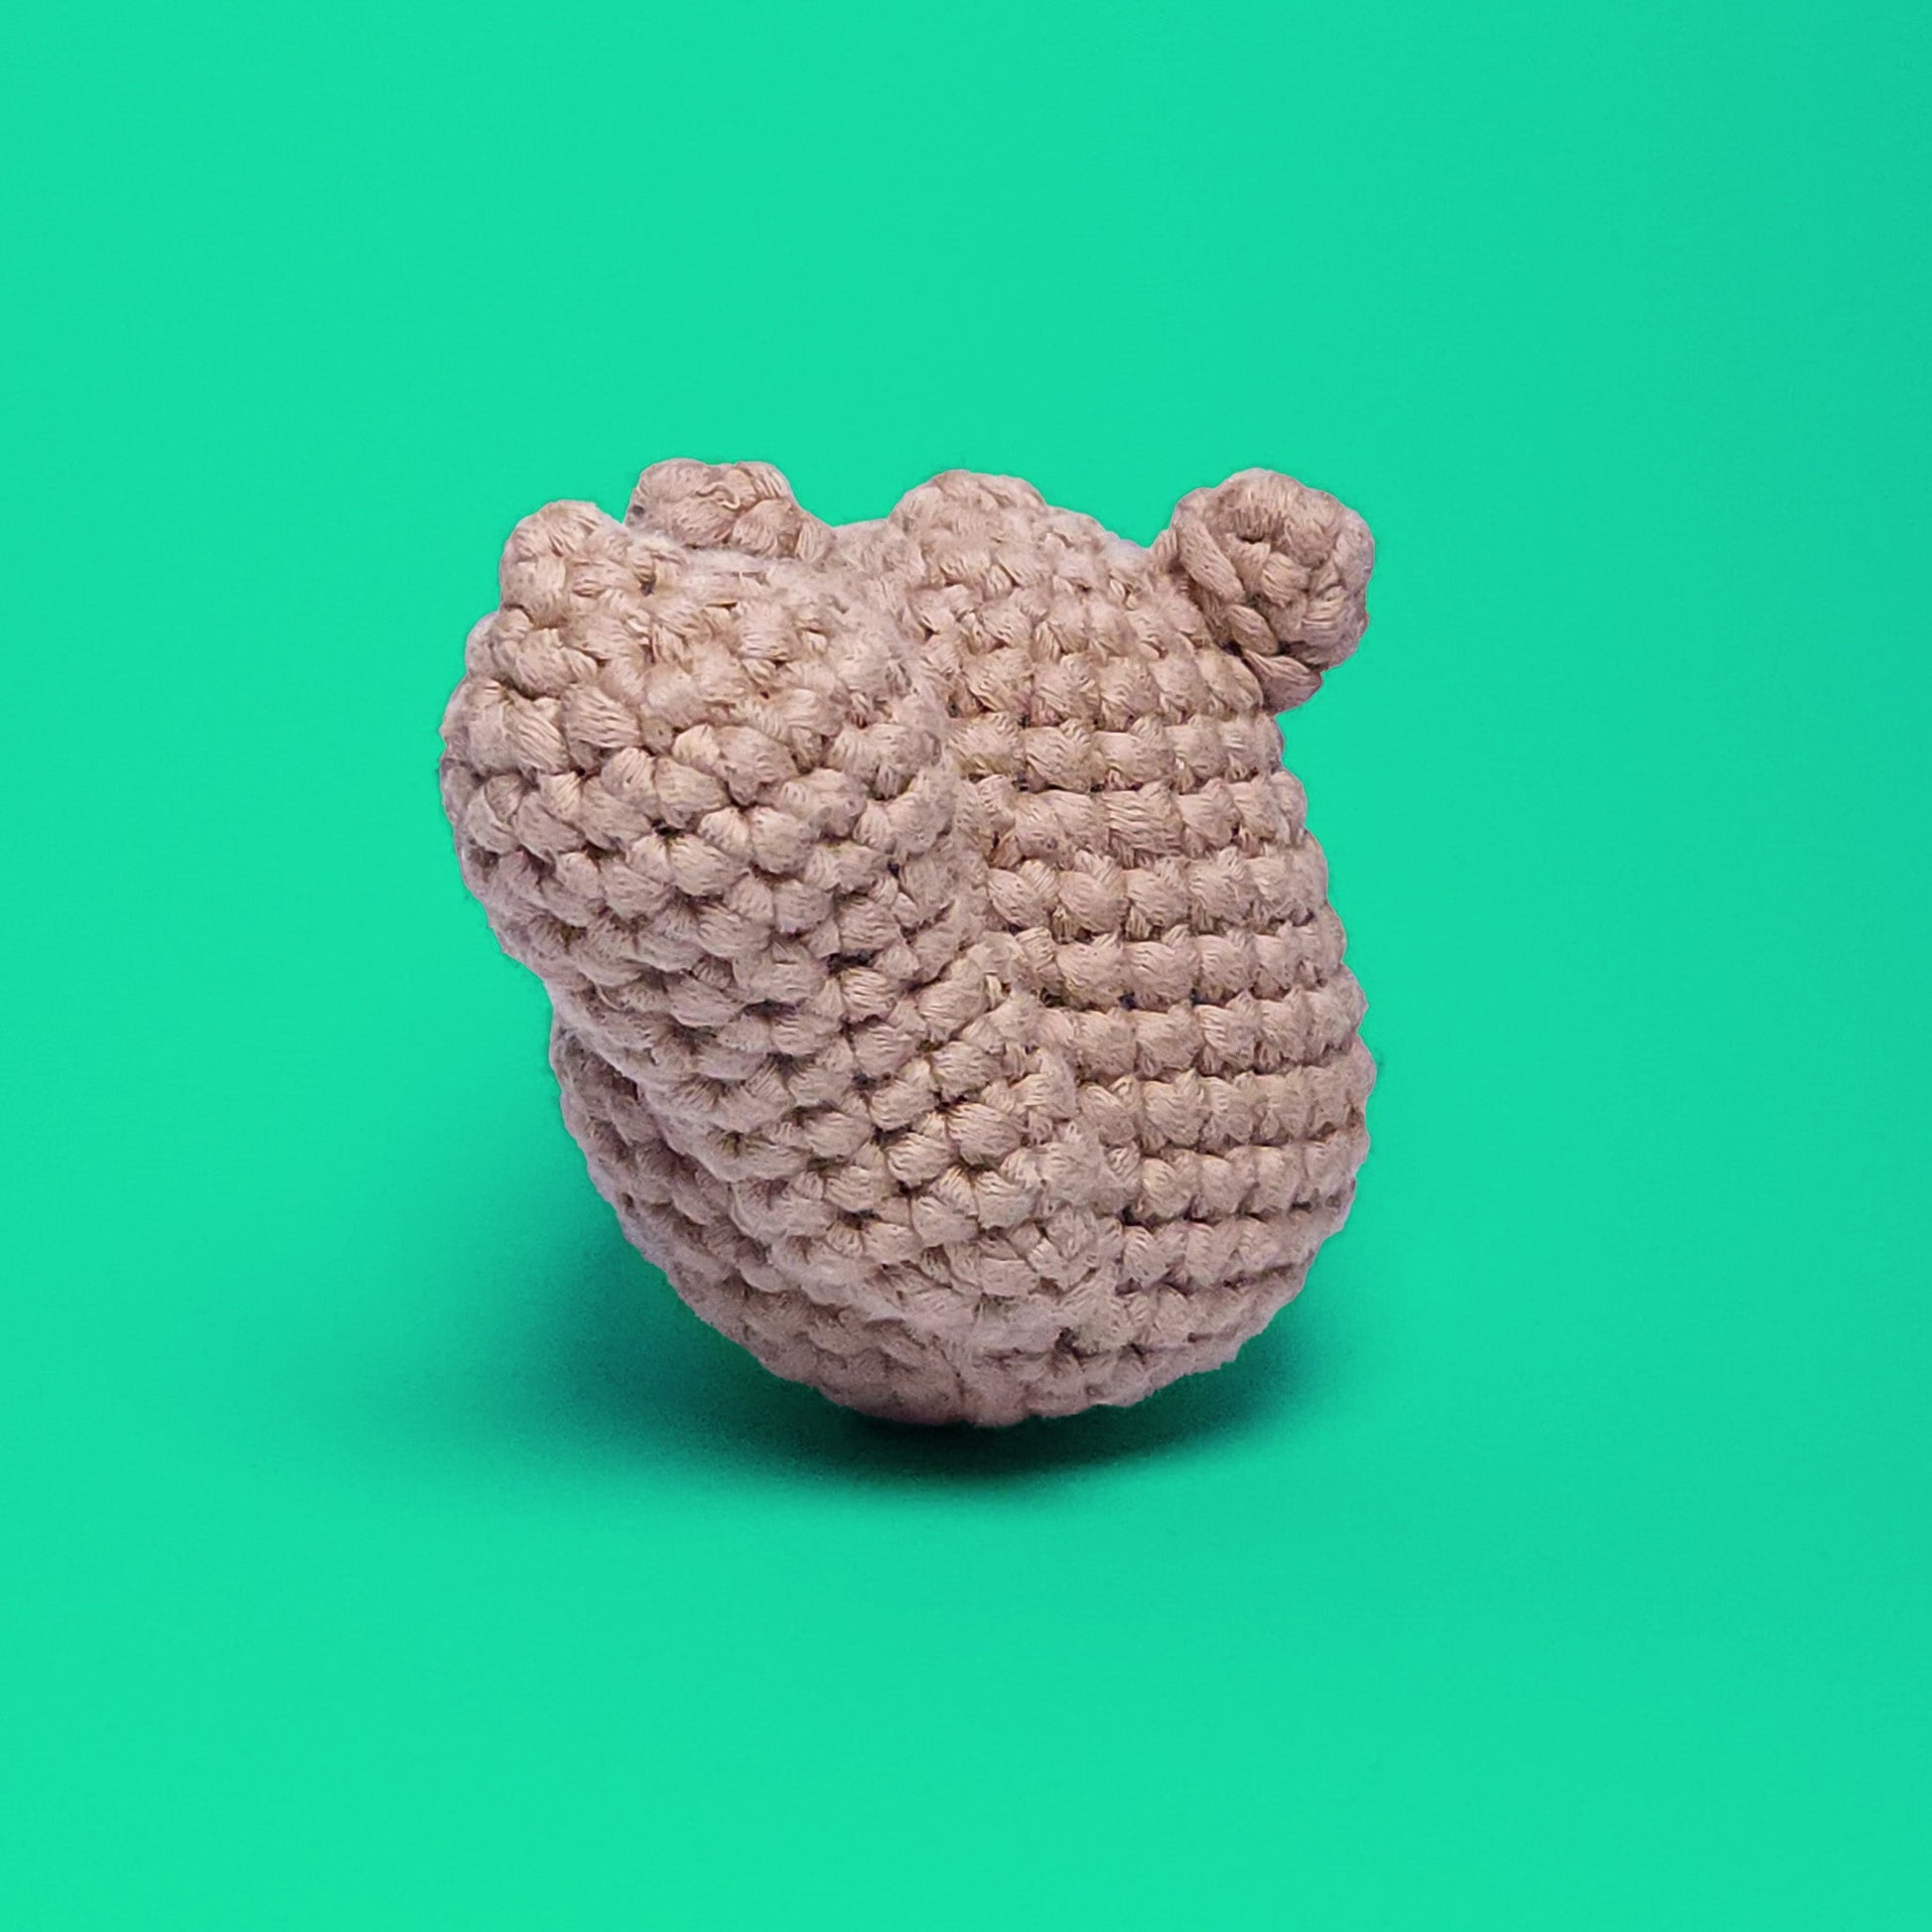 Cute beaver amigurumi, crafted from our beginner-friendly crochet kit. Perfect for crochet enthusiasts looking to create adorable projects. Back view showcasing its big fluffy tail.